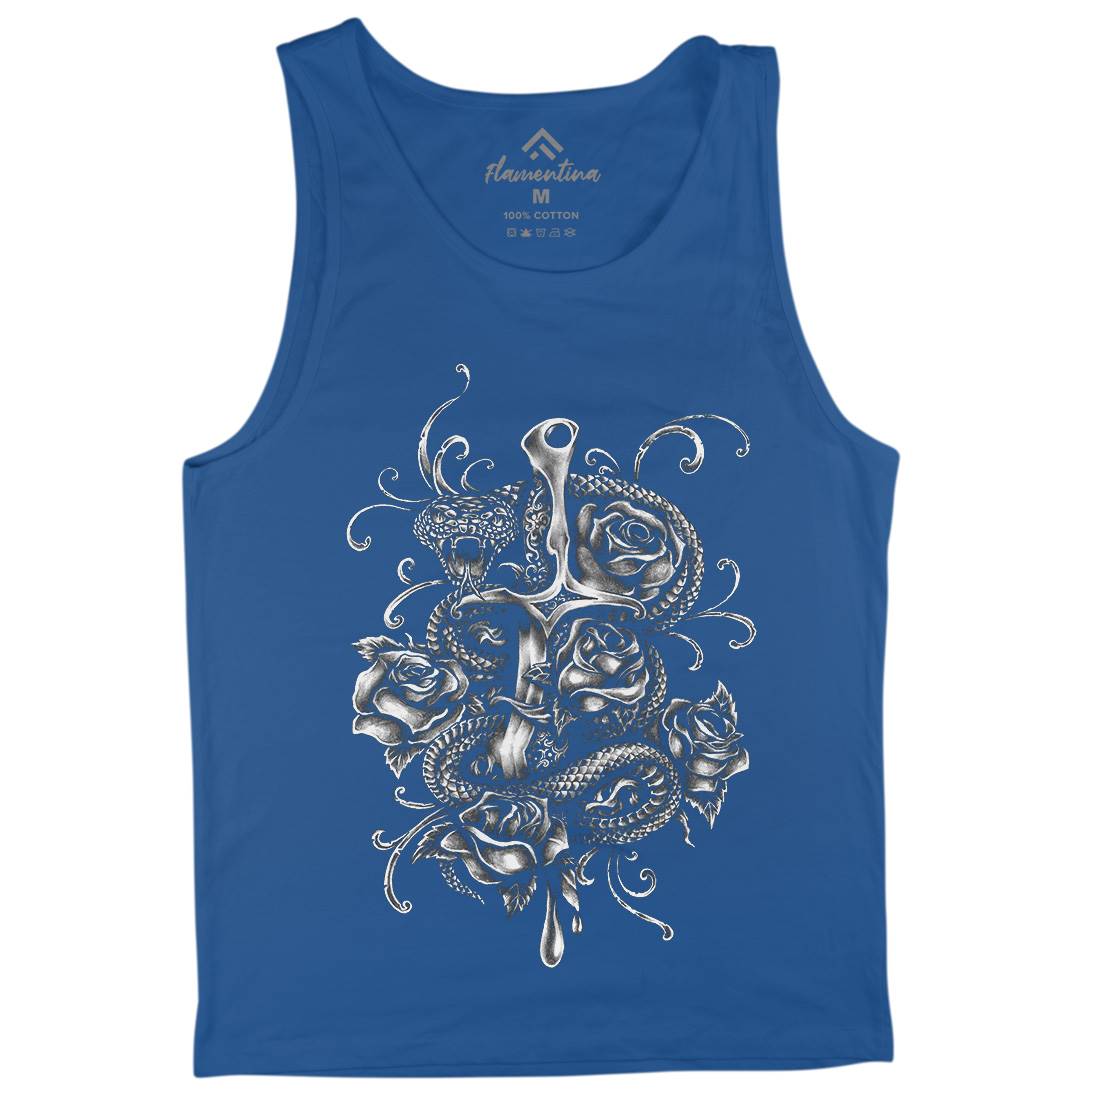 Dagger And Snake Mens Tank Top Vest Tattoo A413